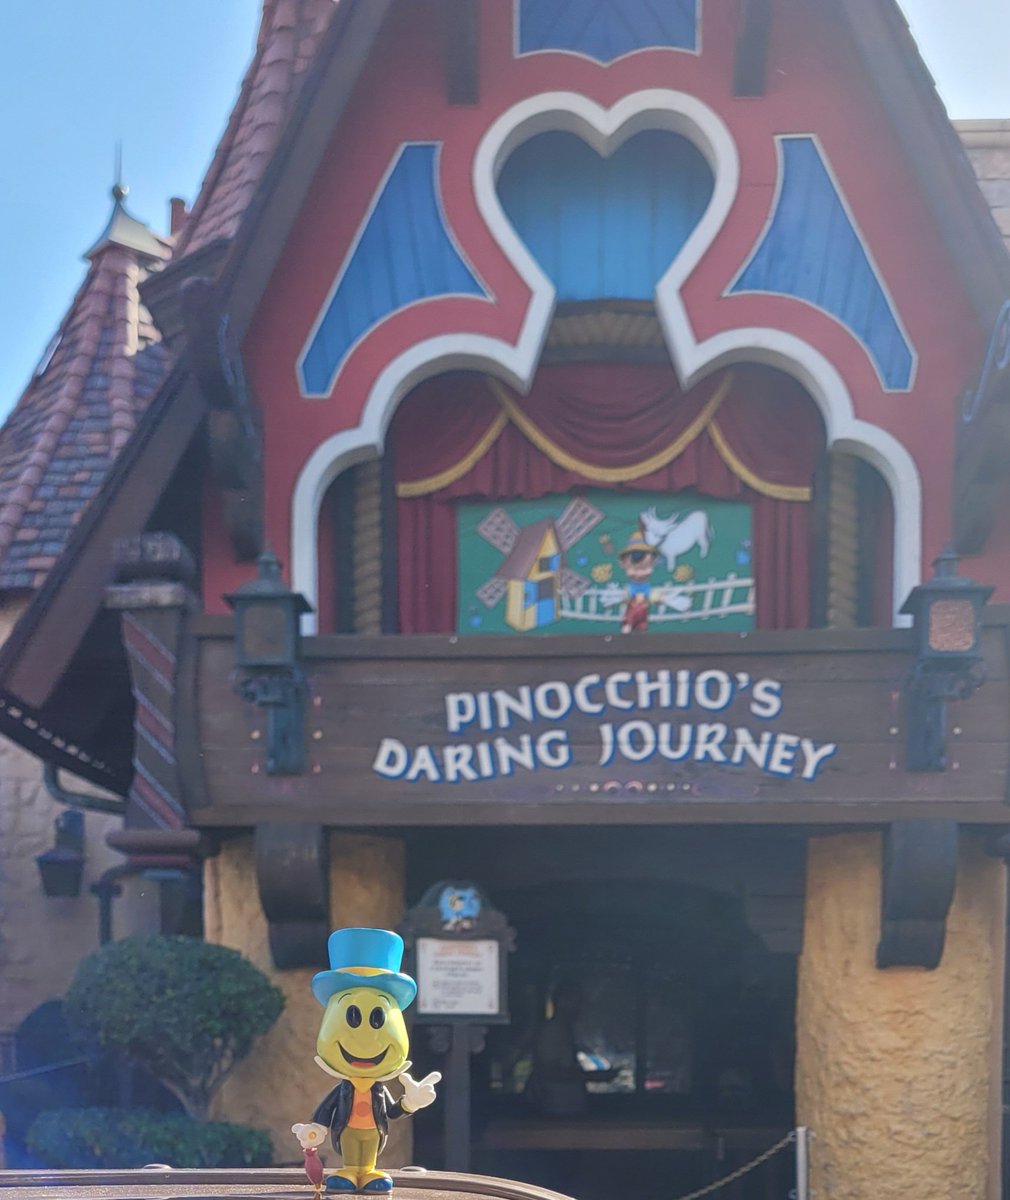 Happy #funkosodasaturday #funkofamily #funkocommunity @OriginalFunko @Disneyland! It took a moment to get this shot (and any picture at Disneyland 😆) so I'm thankful for the guests that stopped to let me get this! People always love seeing this and say it's so cute too!